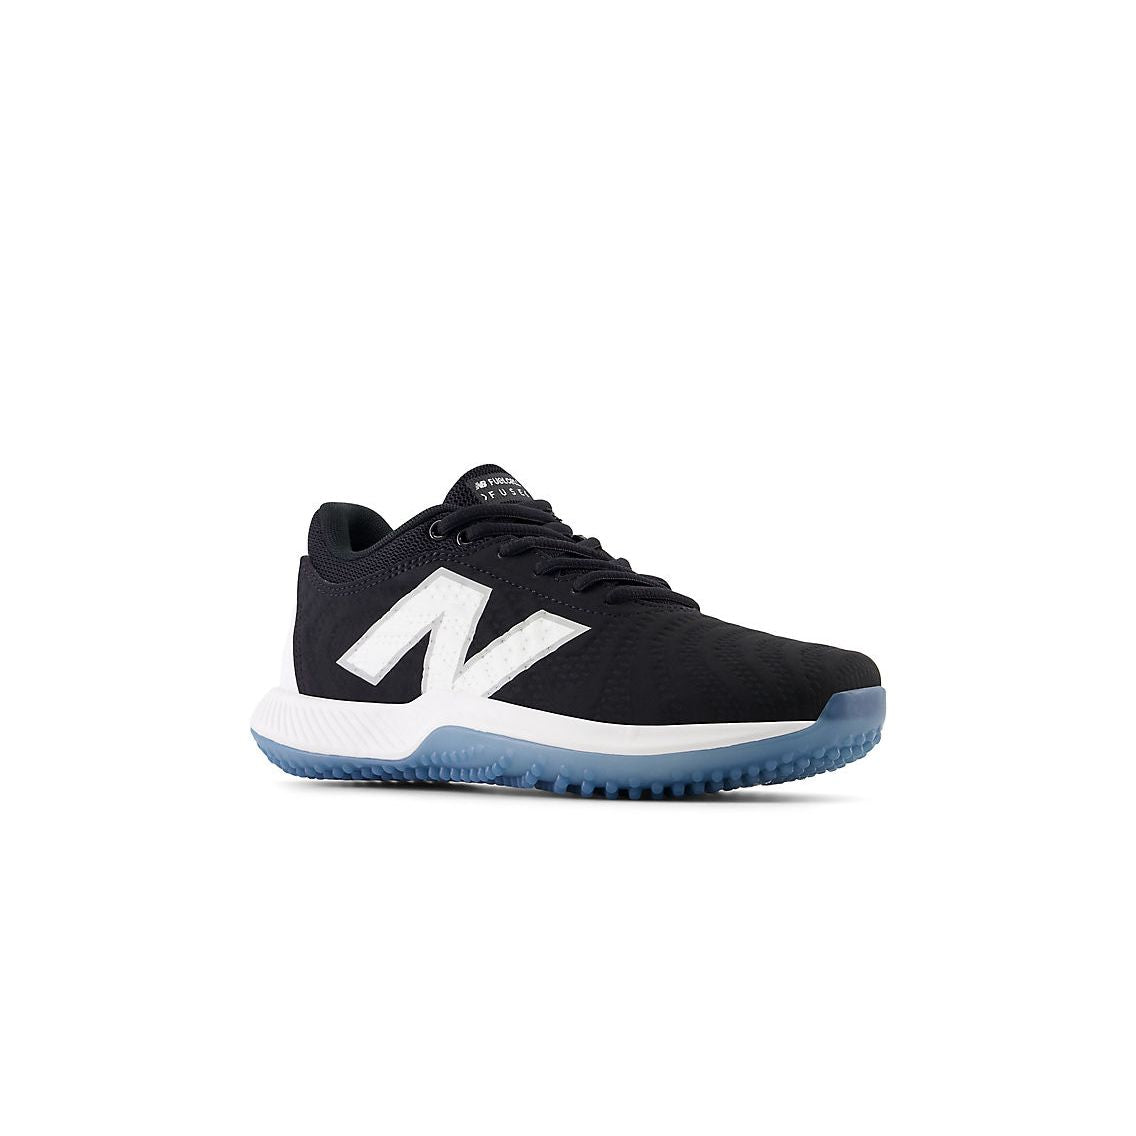 New Balance Women's FuelCell FUSE v4 Turf Trainer Softball Shoes - Black/Optic White - STFUSEK4